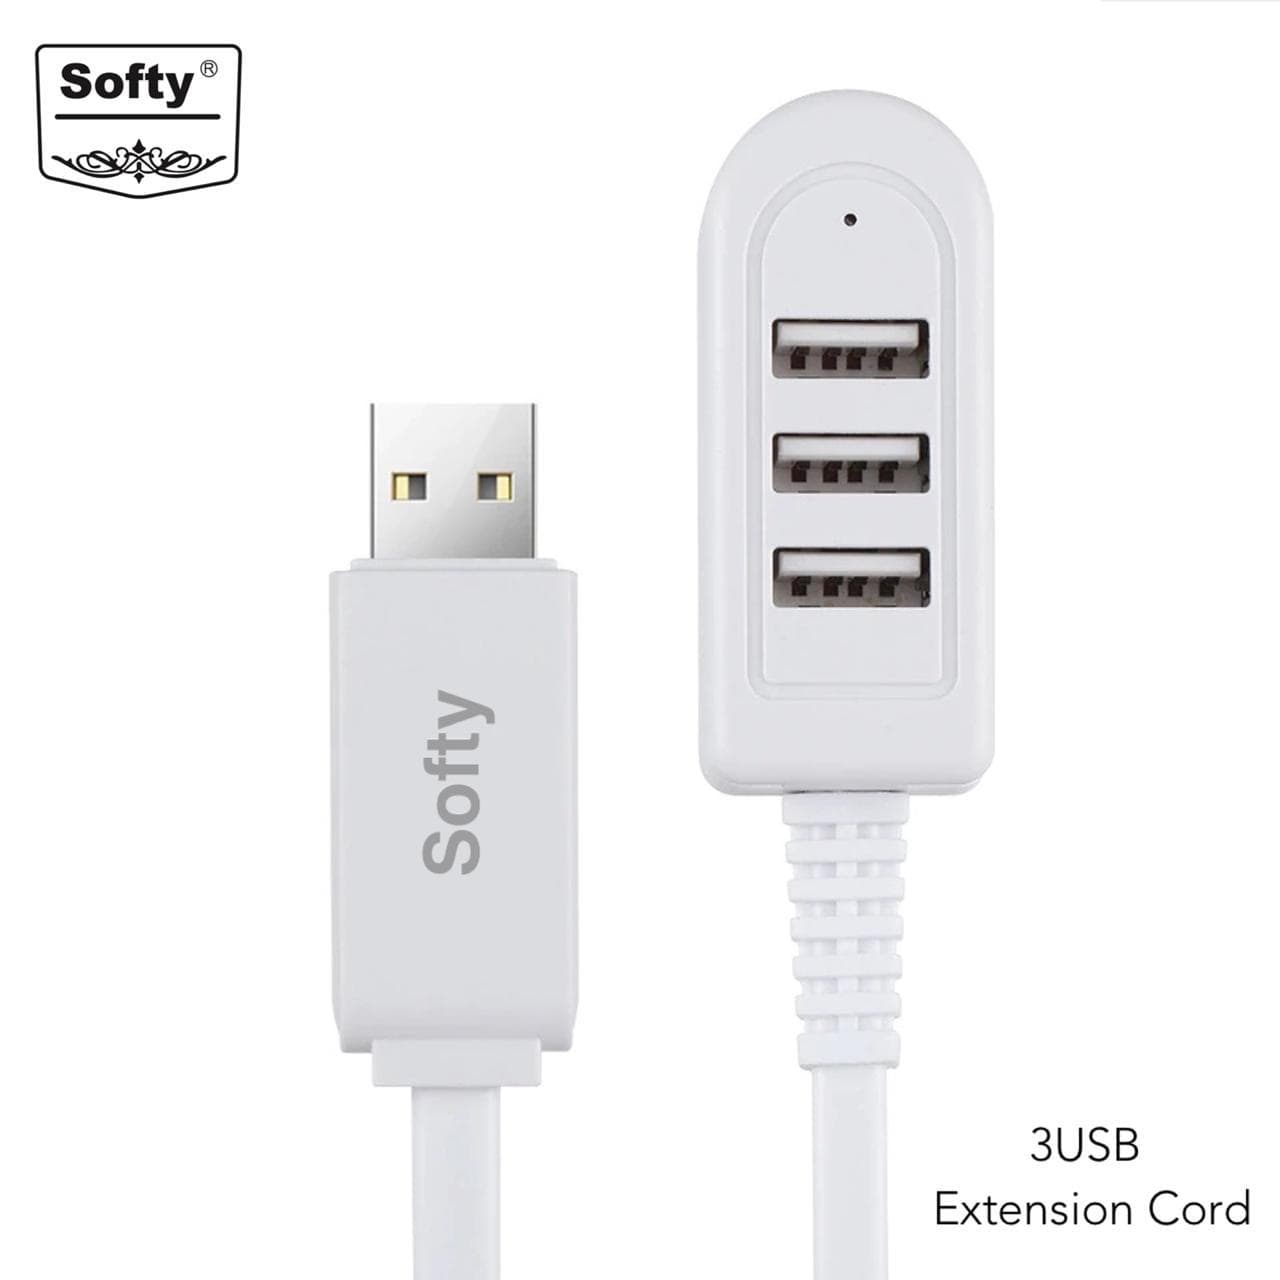 Softy premium quality 3-USB extension cord with data-USB Cable-dealsplant